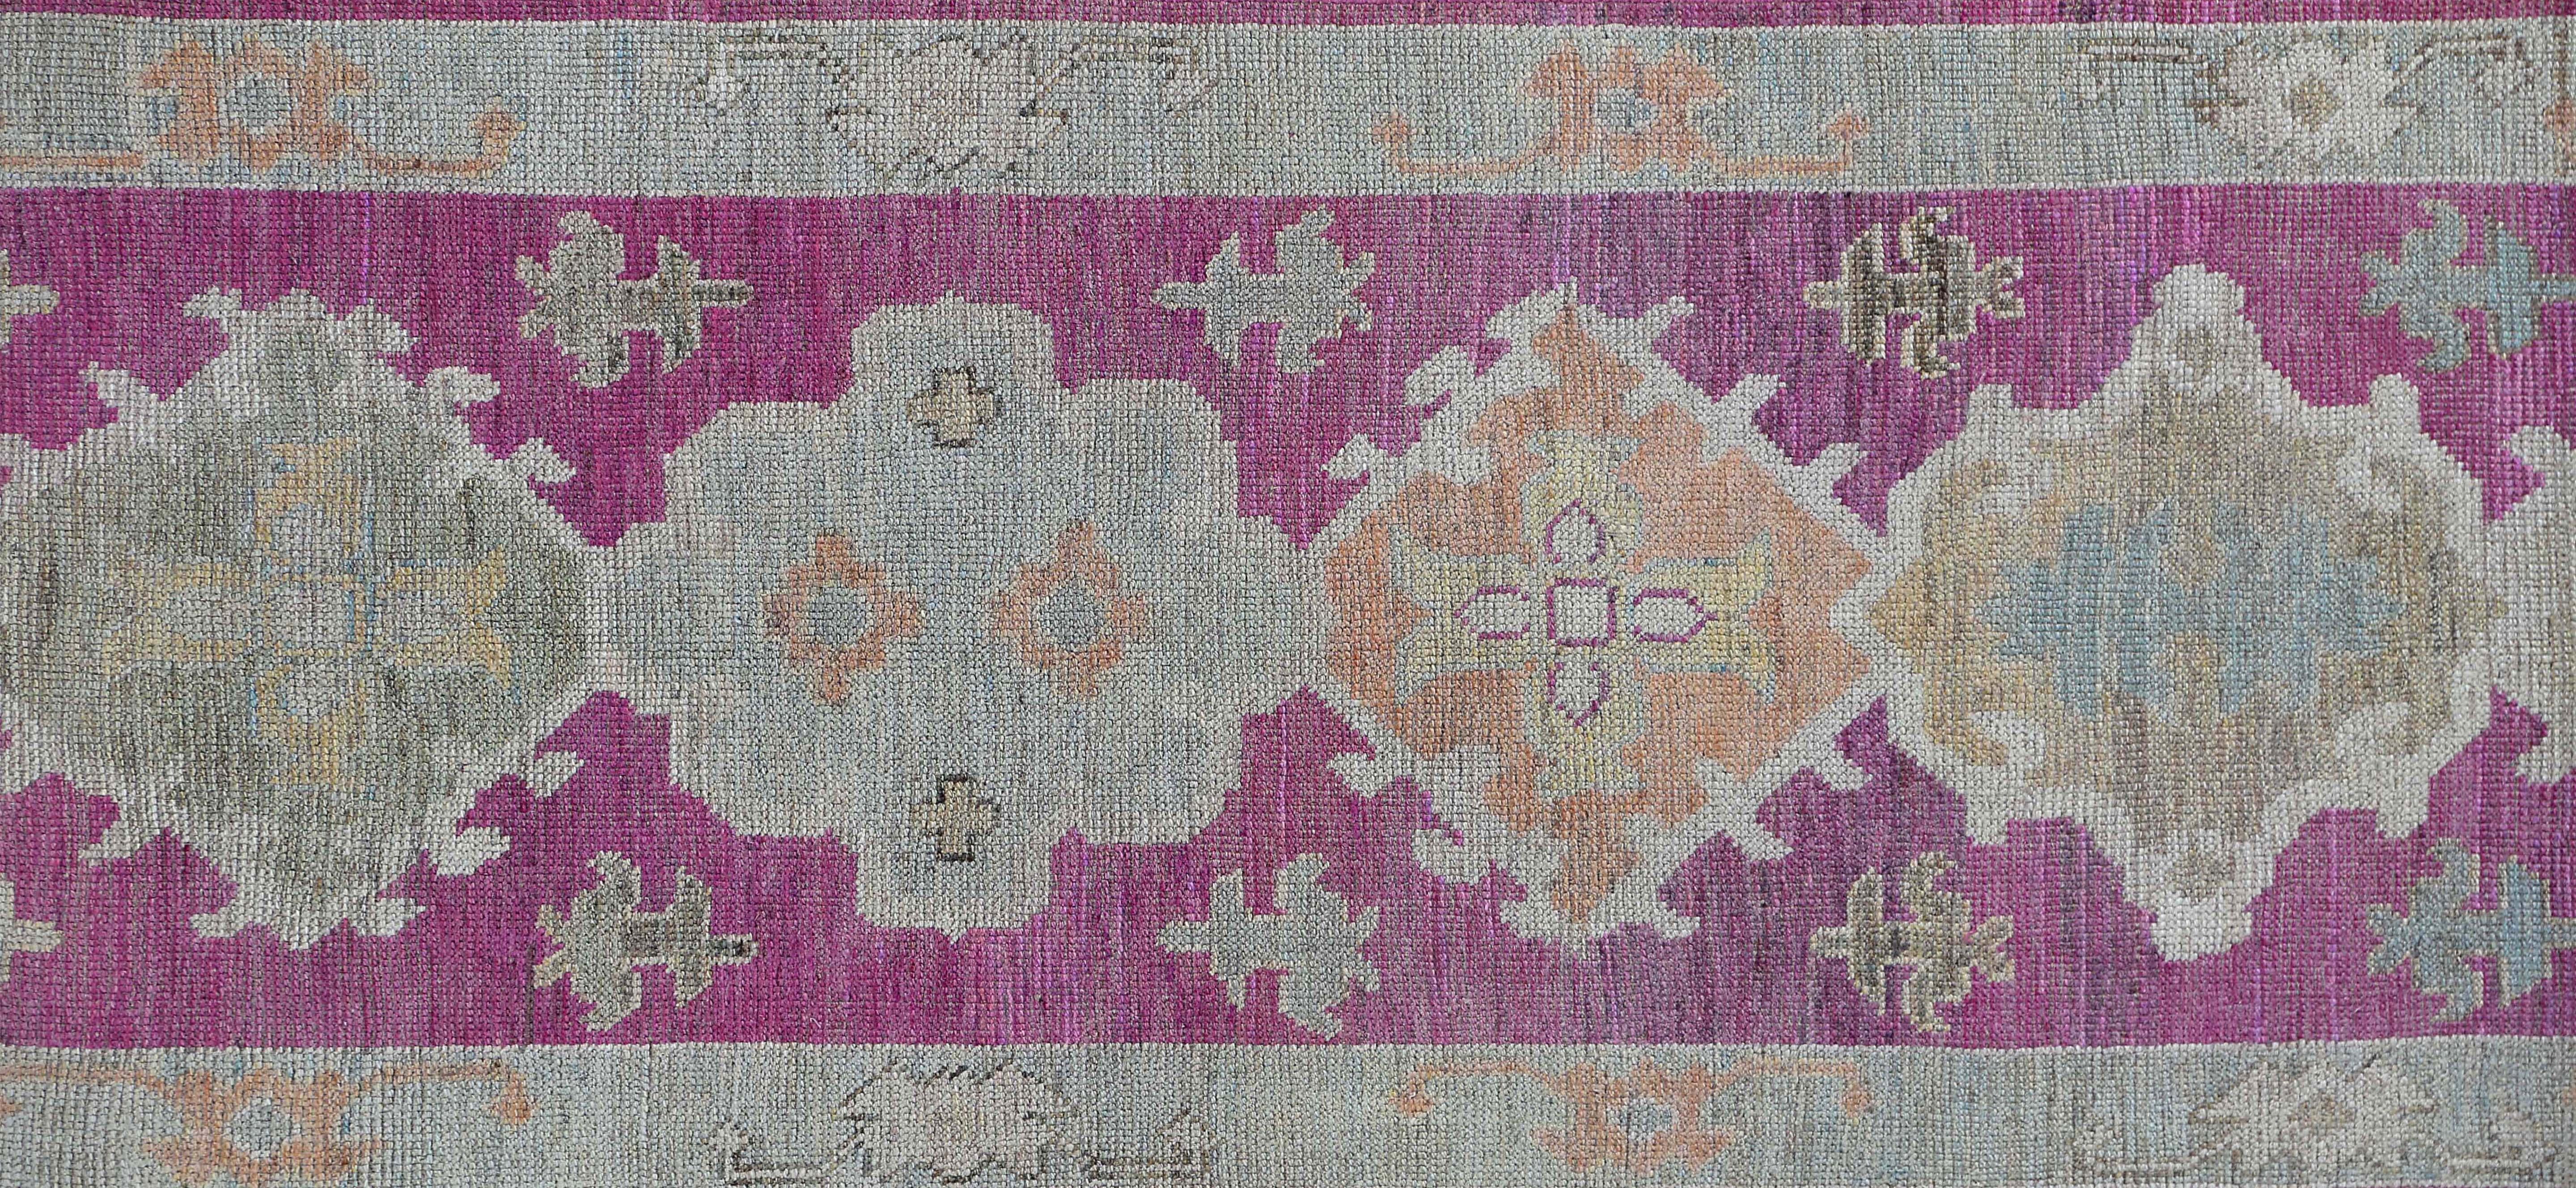 Introducing our stunning 3.4'' x 13.7'' Purple Backed Runner, handcrafted from premium quality wool to provide a durable and luxurious underfoot experience.

This runner features a bold and striking purple background that beautifully complements